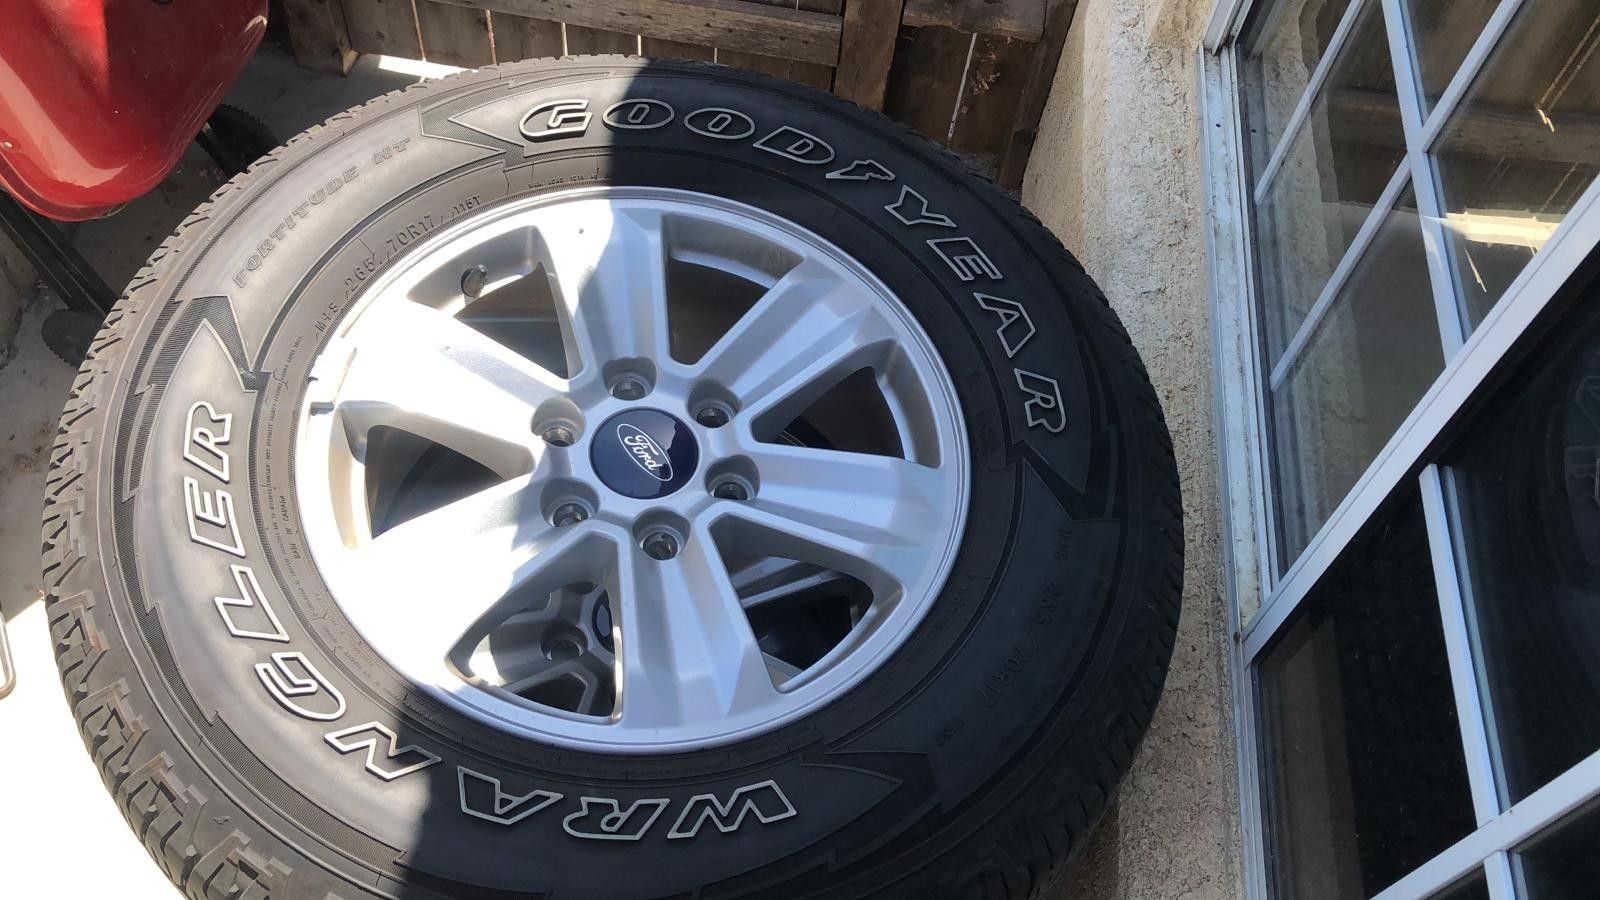 F-150 tires and rims